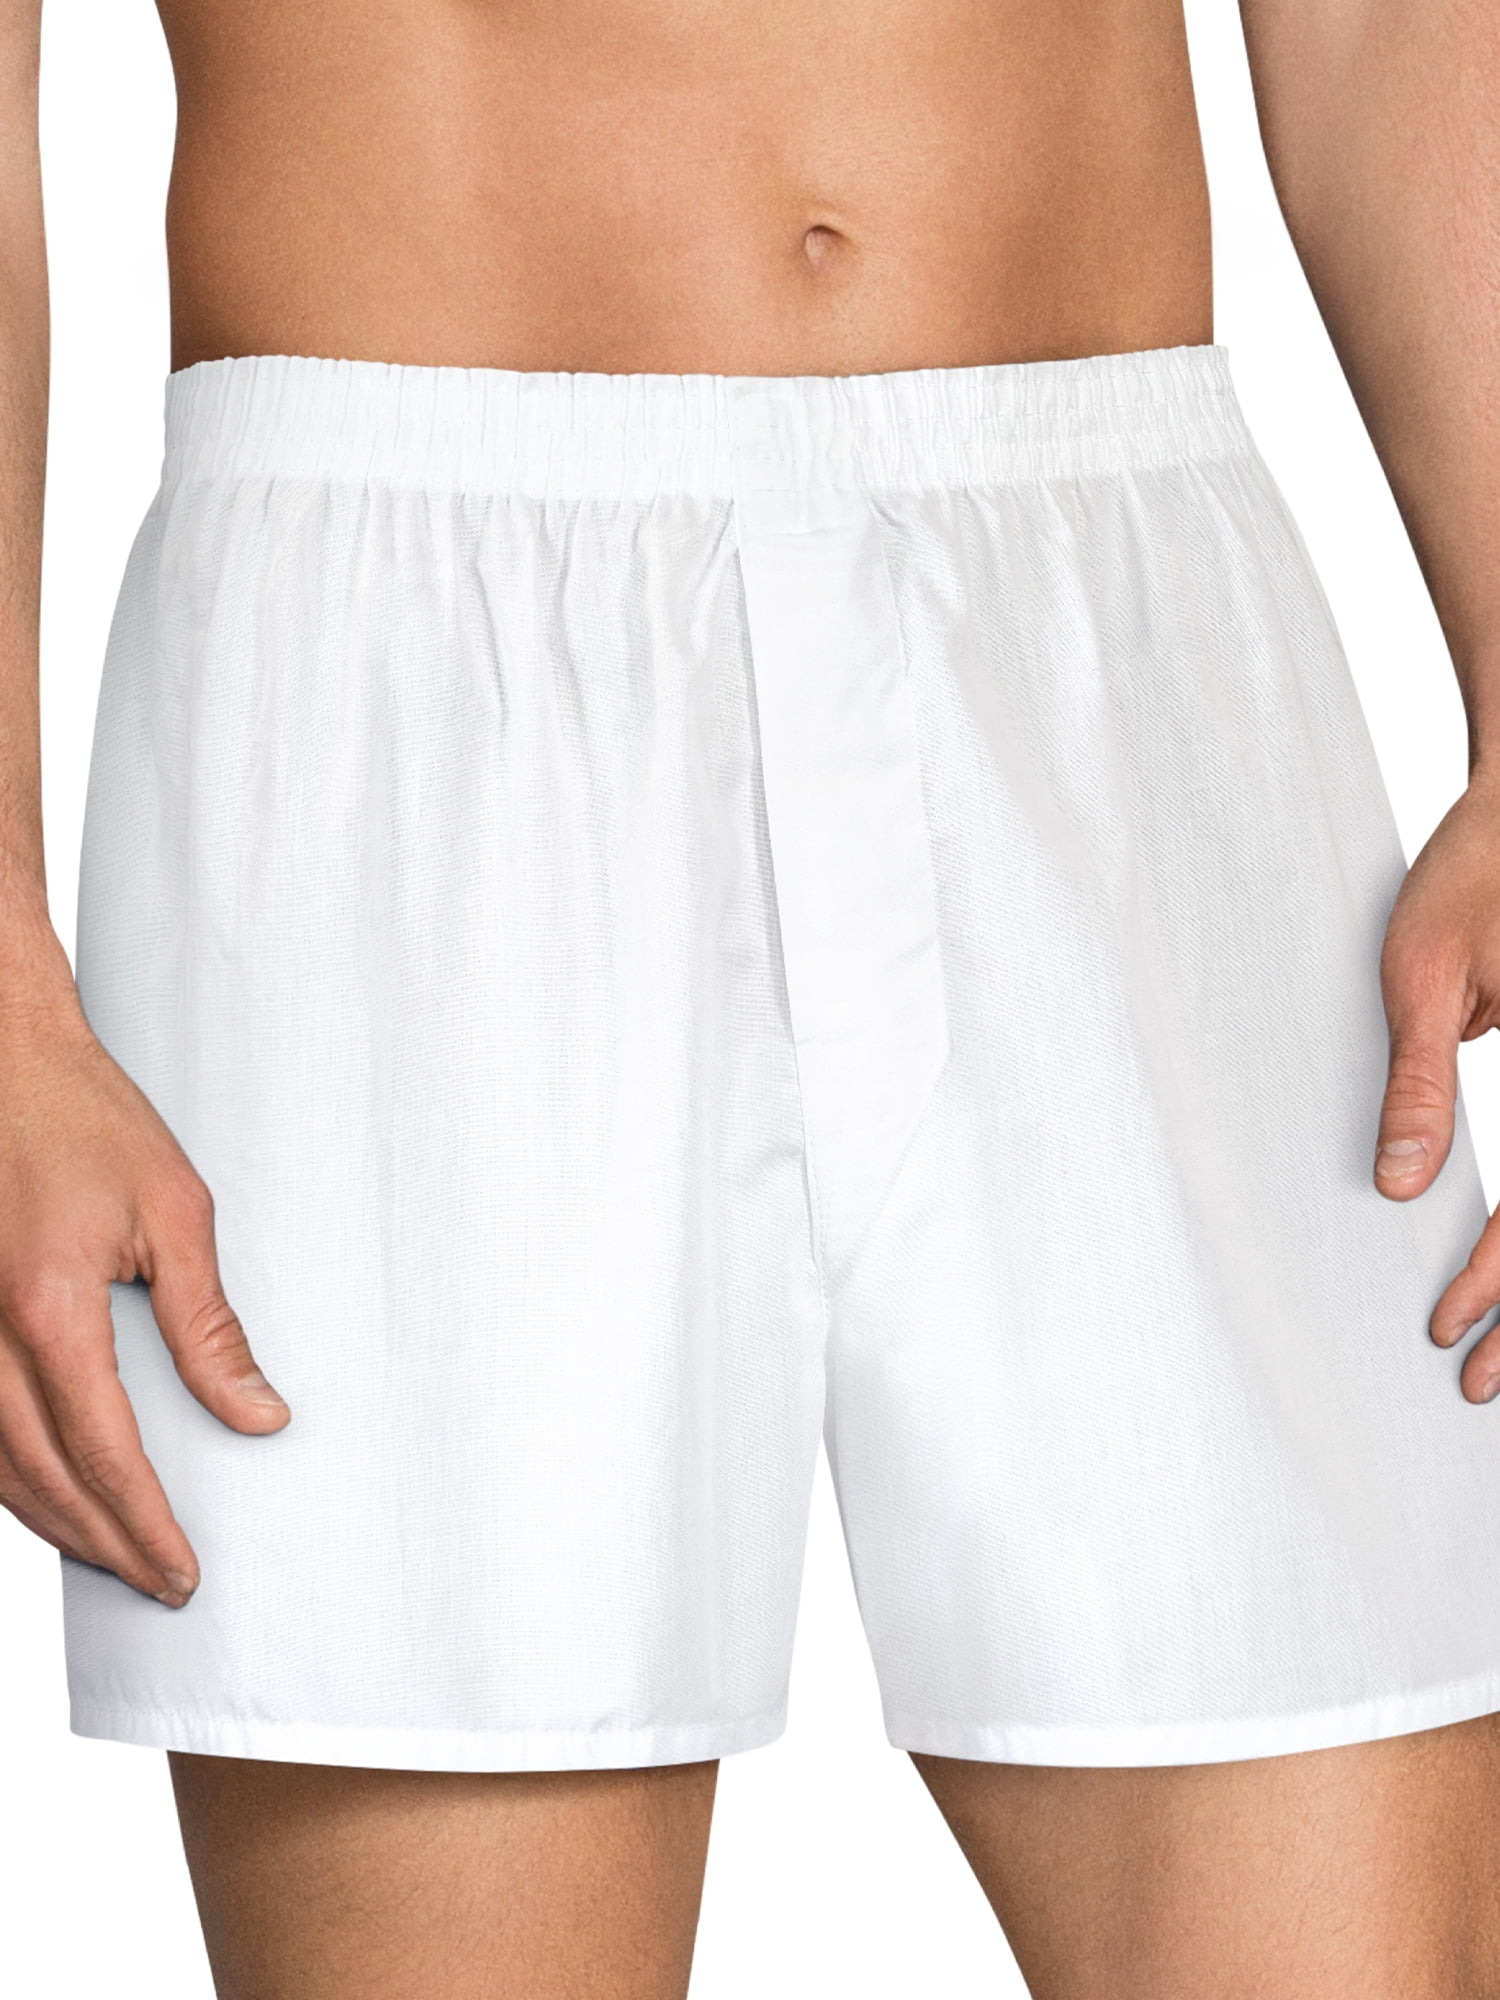 Buy Lyle And Scott Vintage Mens Jackson Five Pack Boxers White